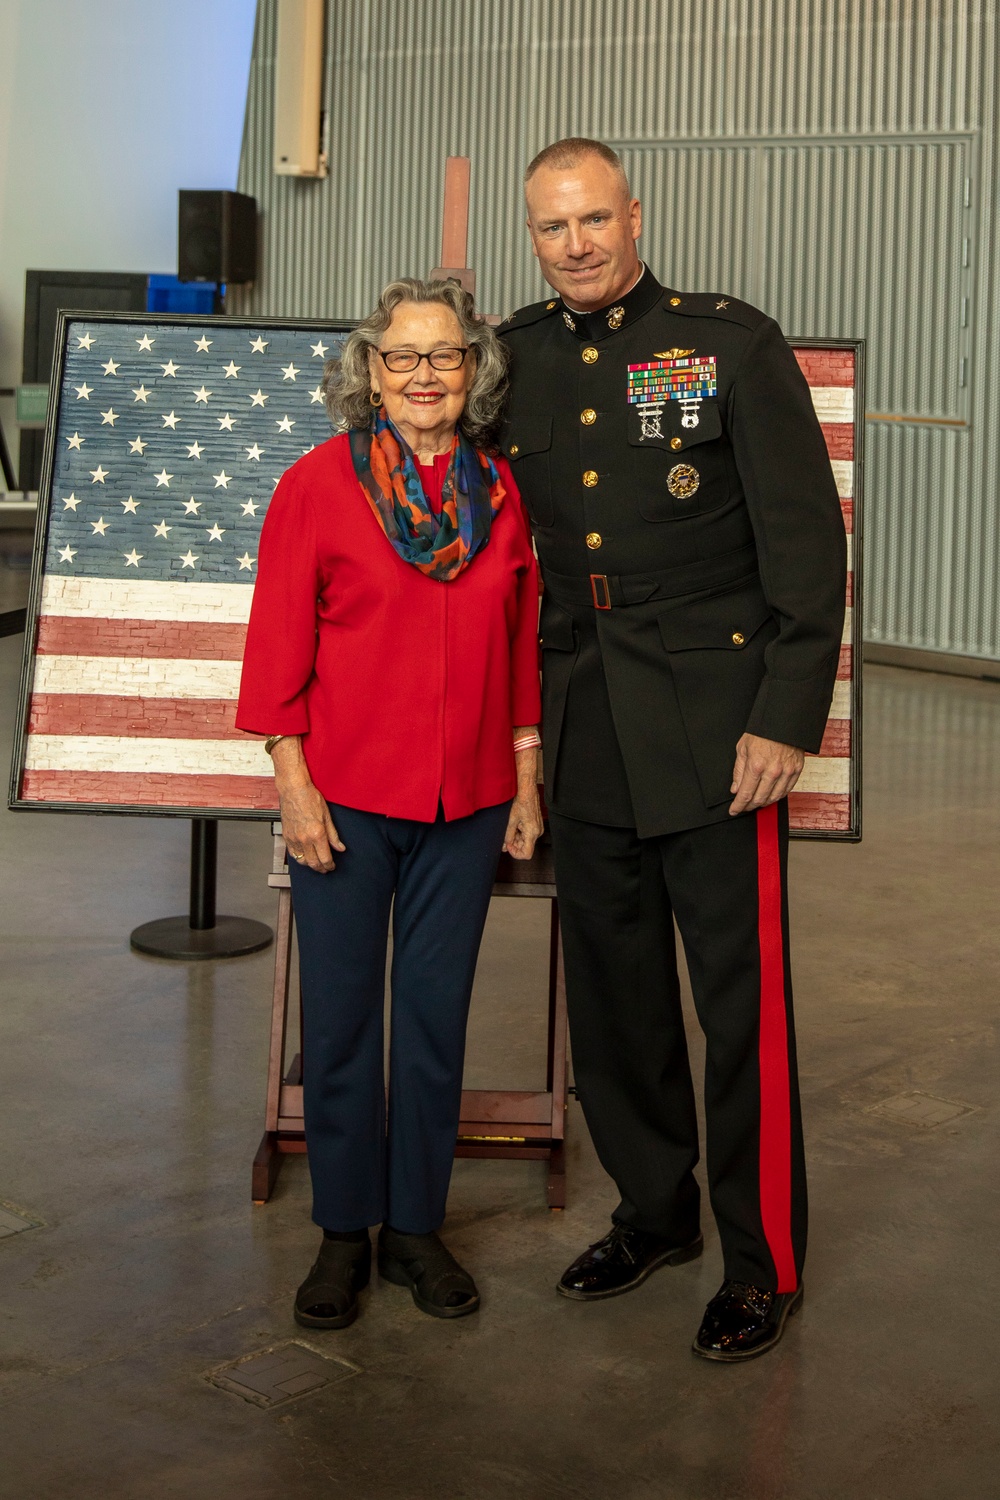 Veterans Day Commemoration | WWII Museum New Orleans